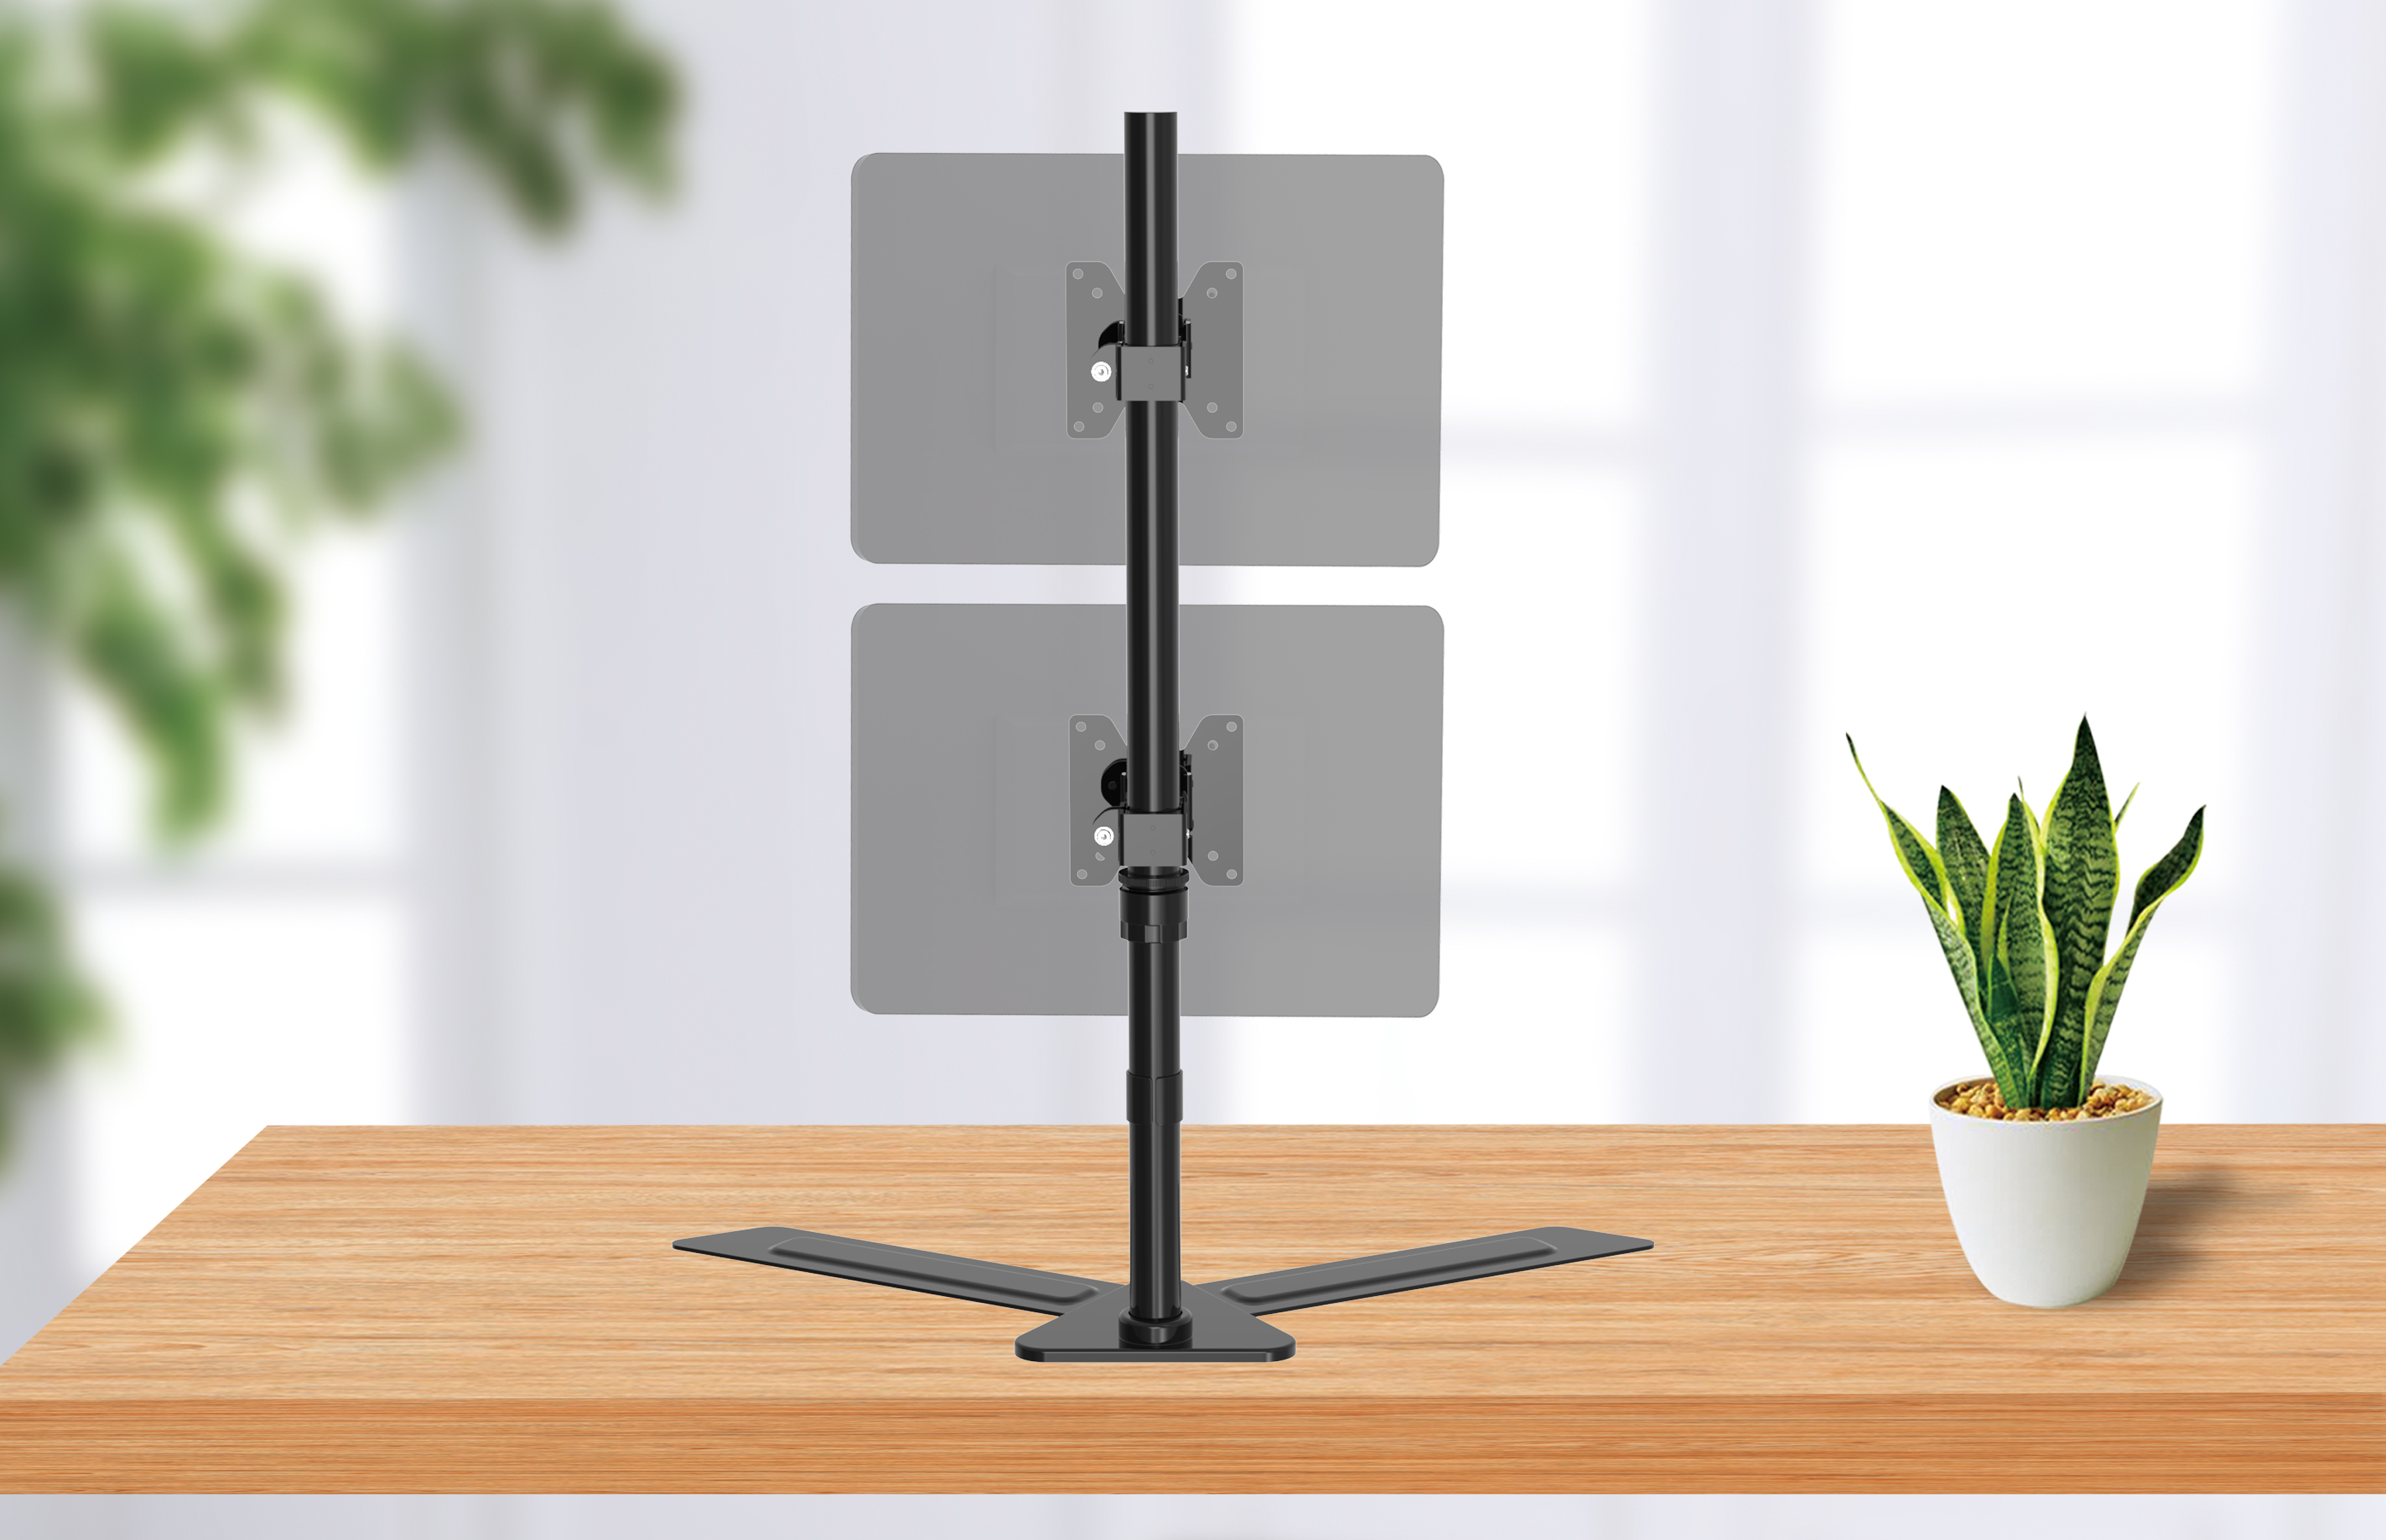 Illustration of two monitors attached to a Cepter monitor mount